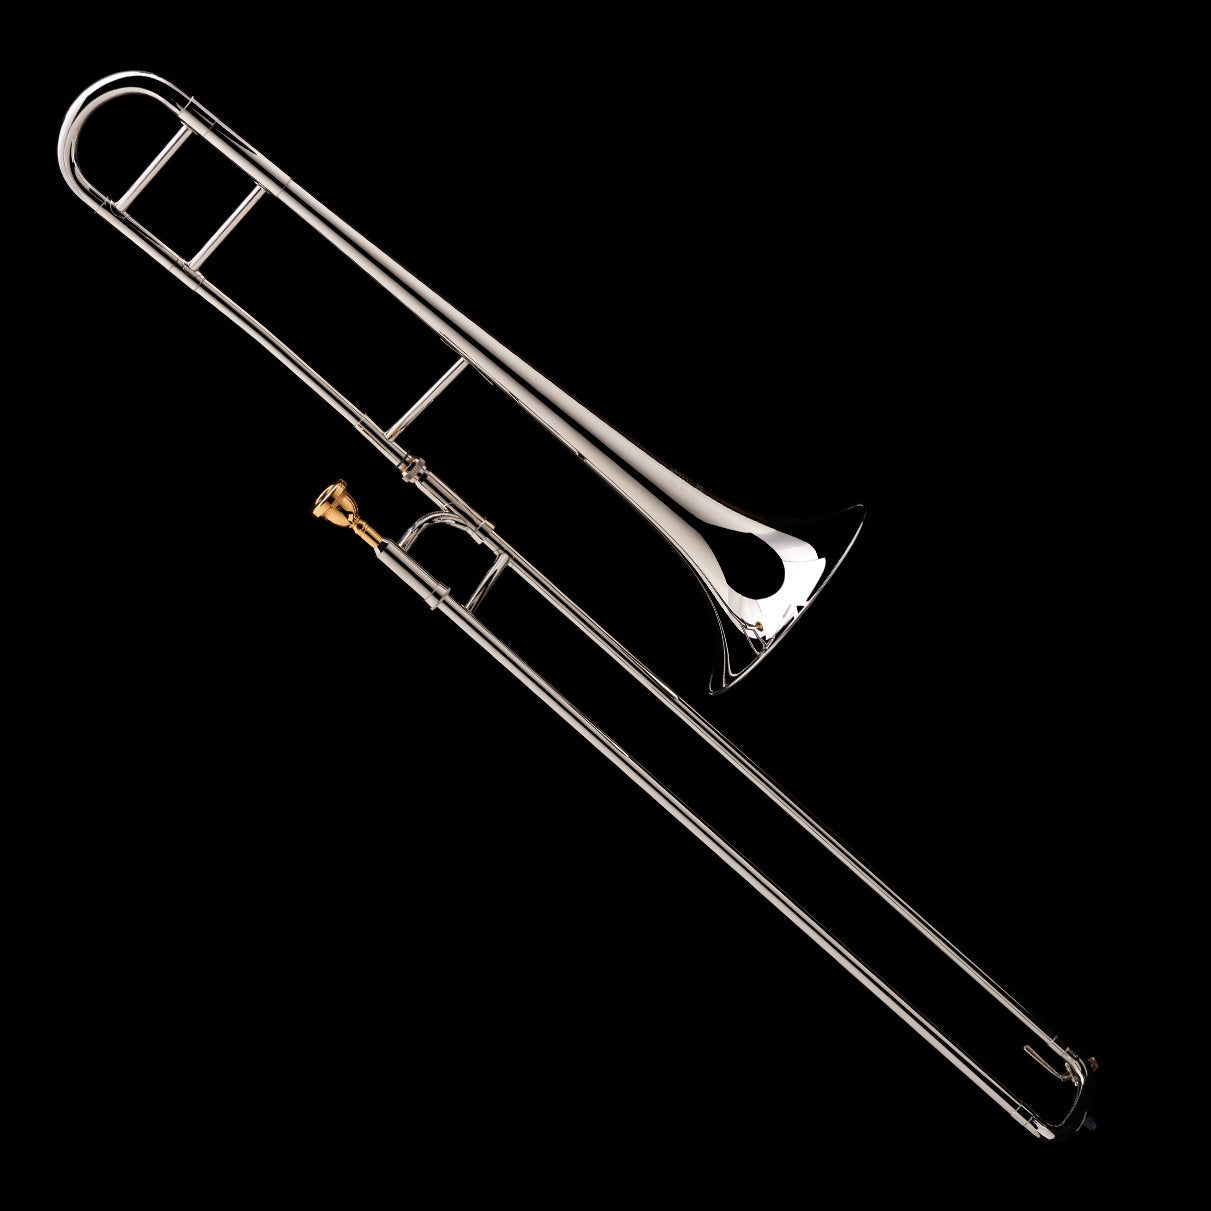 An image of a Bb Tenor Trombone from Wessex Tubas, facing downwards and to the right